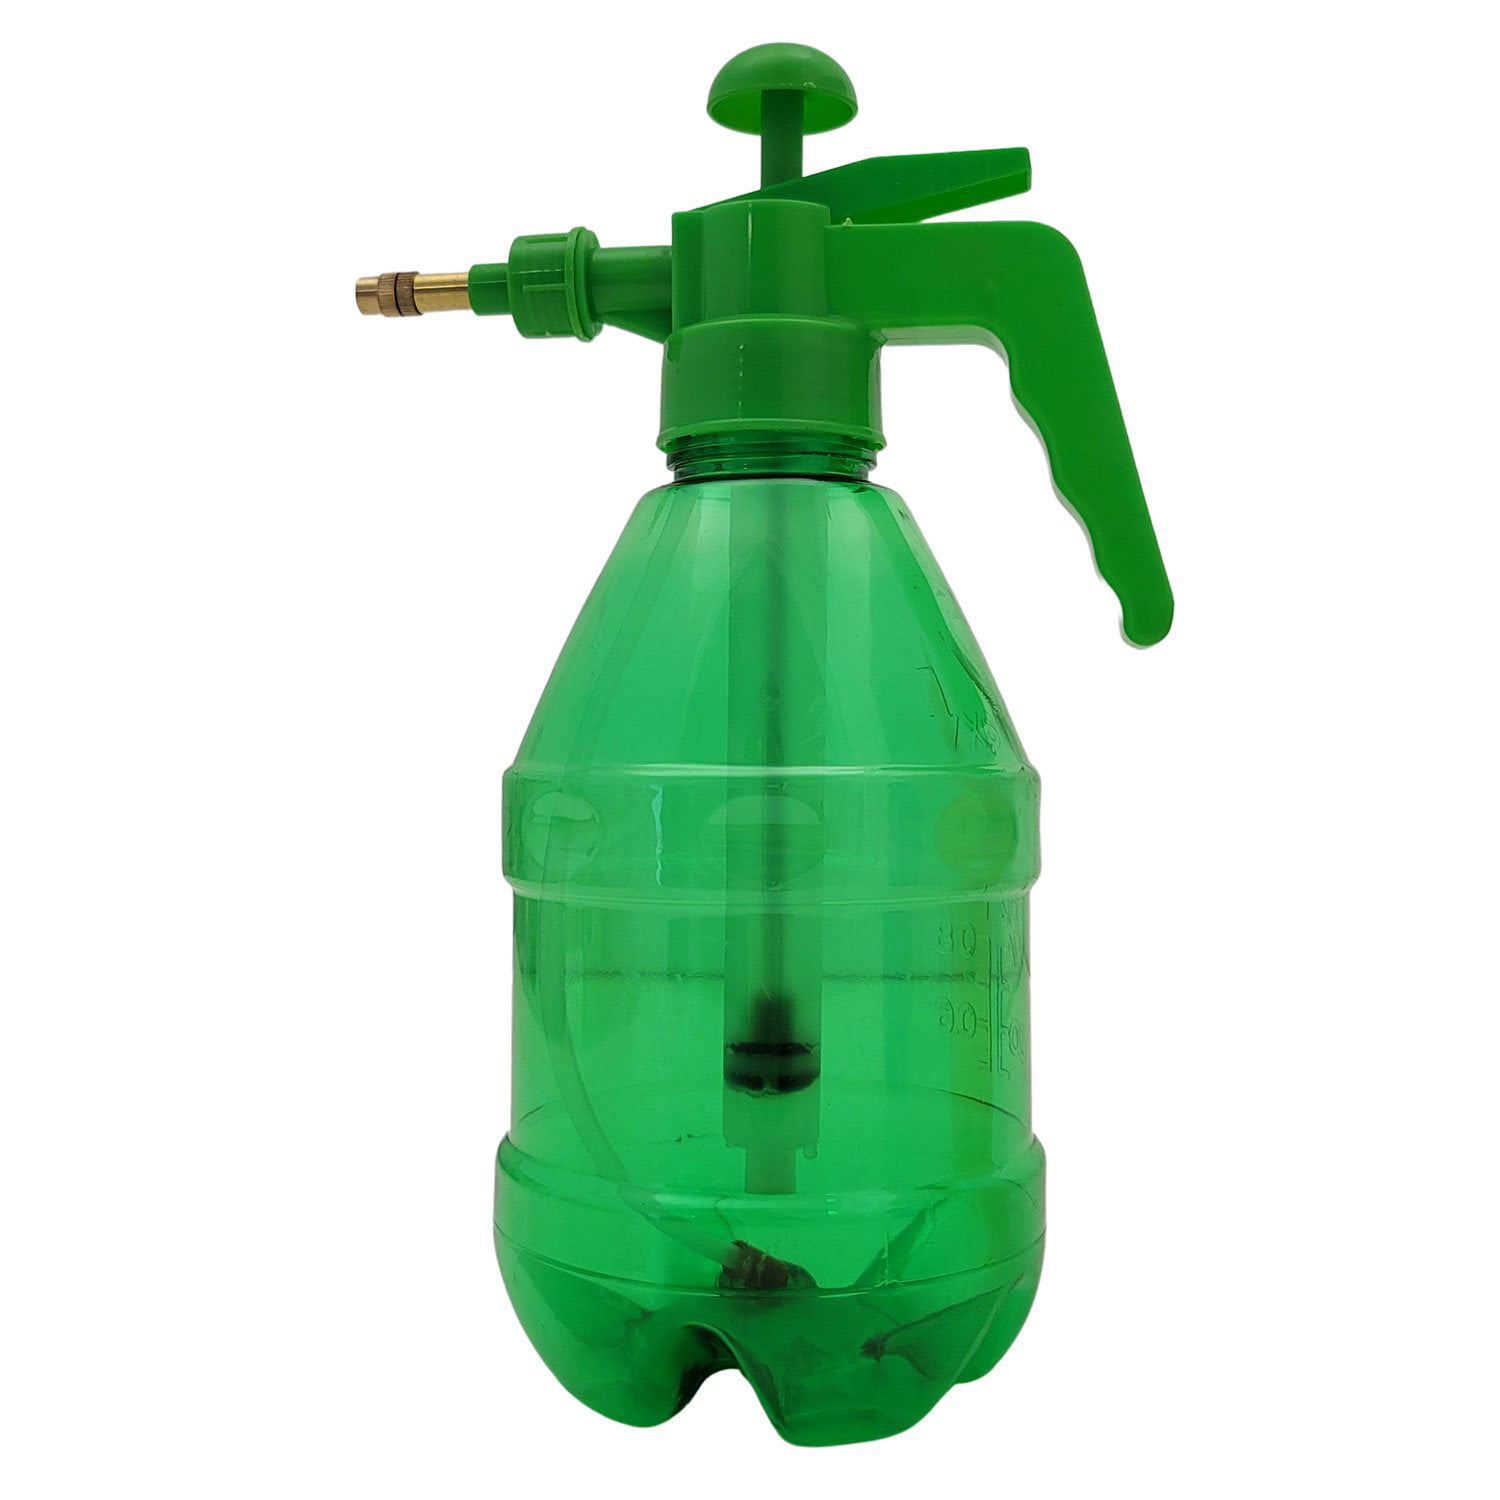 0.26 Gallon Handheld Garden Pump Sprayer,Lawn & Garden Pressure Water Spray  Bottle with Adjustable Nozzle, for Plants and Other Cleaning Solutions